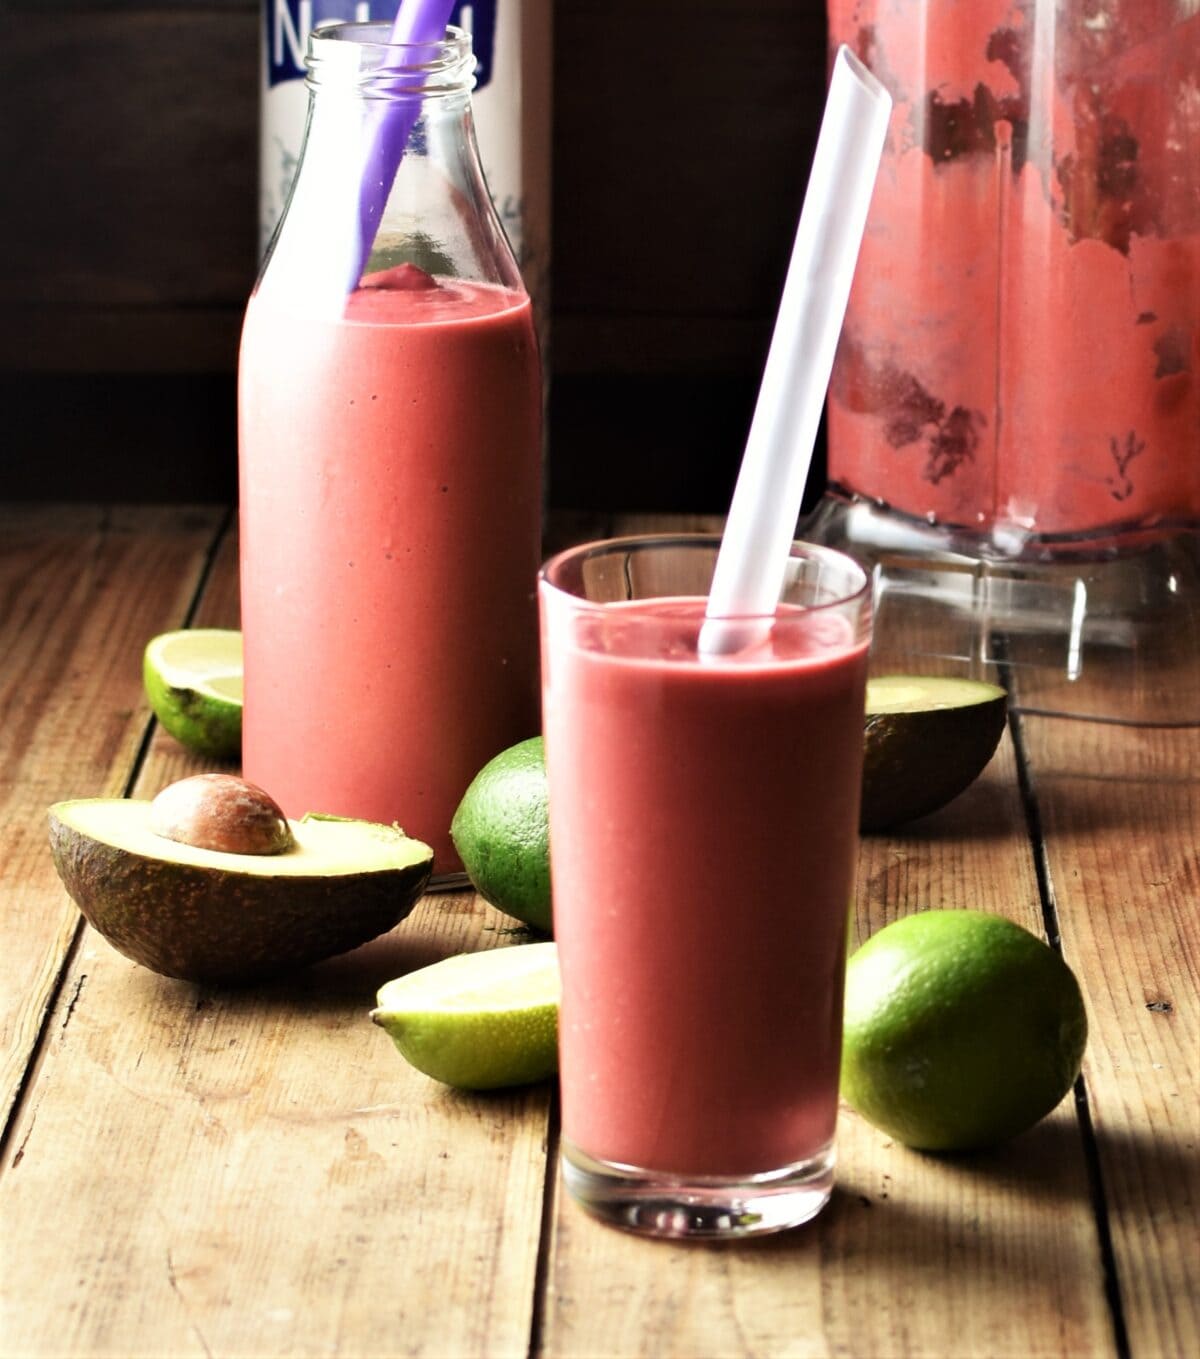 Side view of raspberry avocado smoothie in glass with straw with avocado, limes, smoothie in bottle and blender in background.